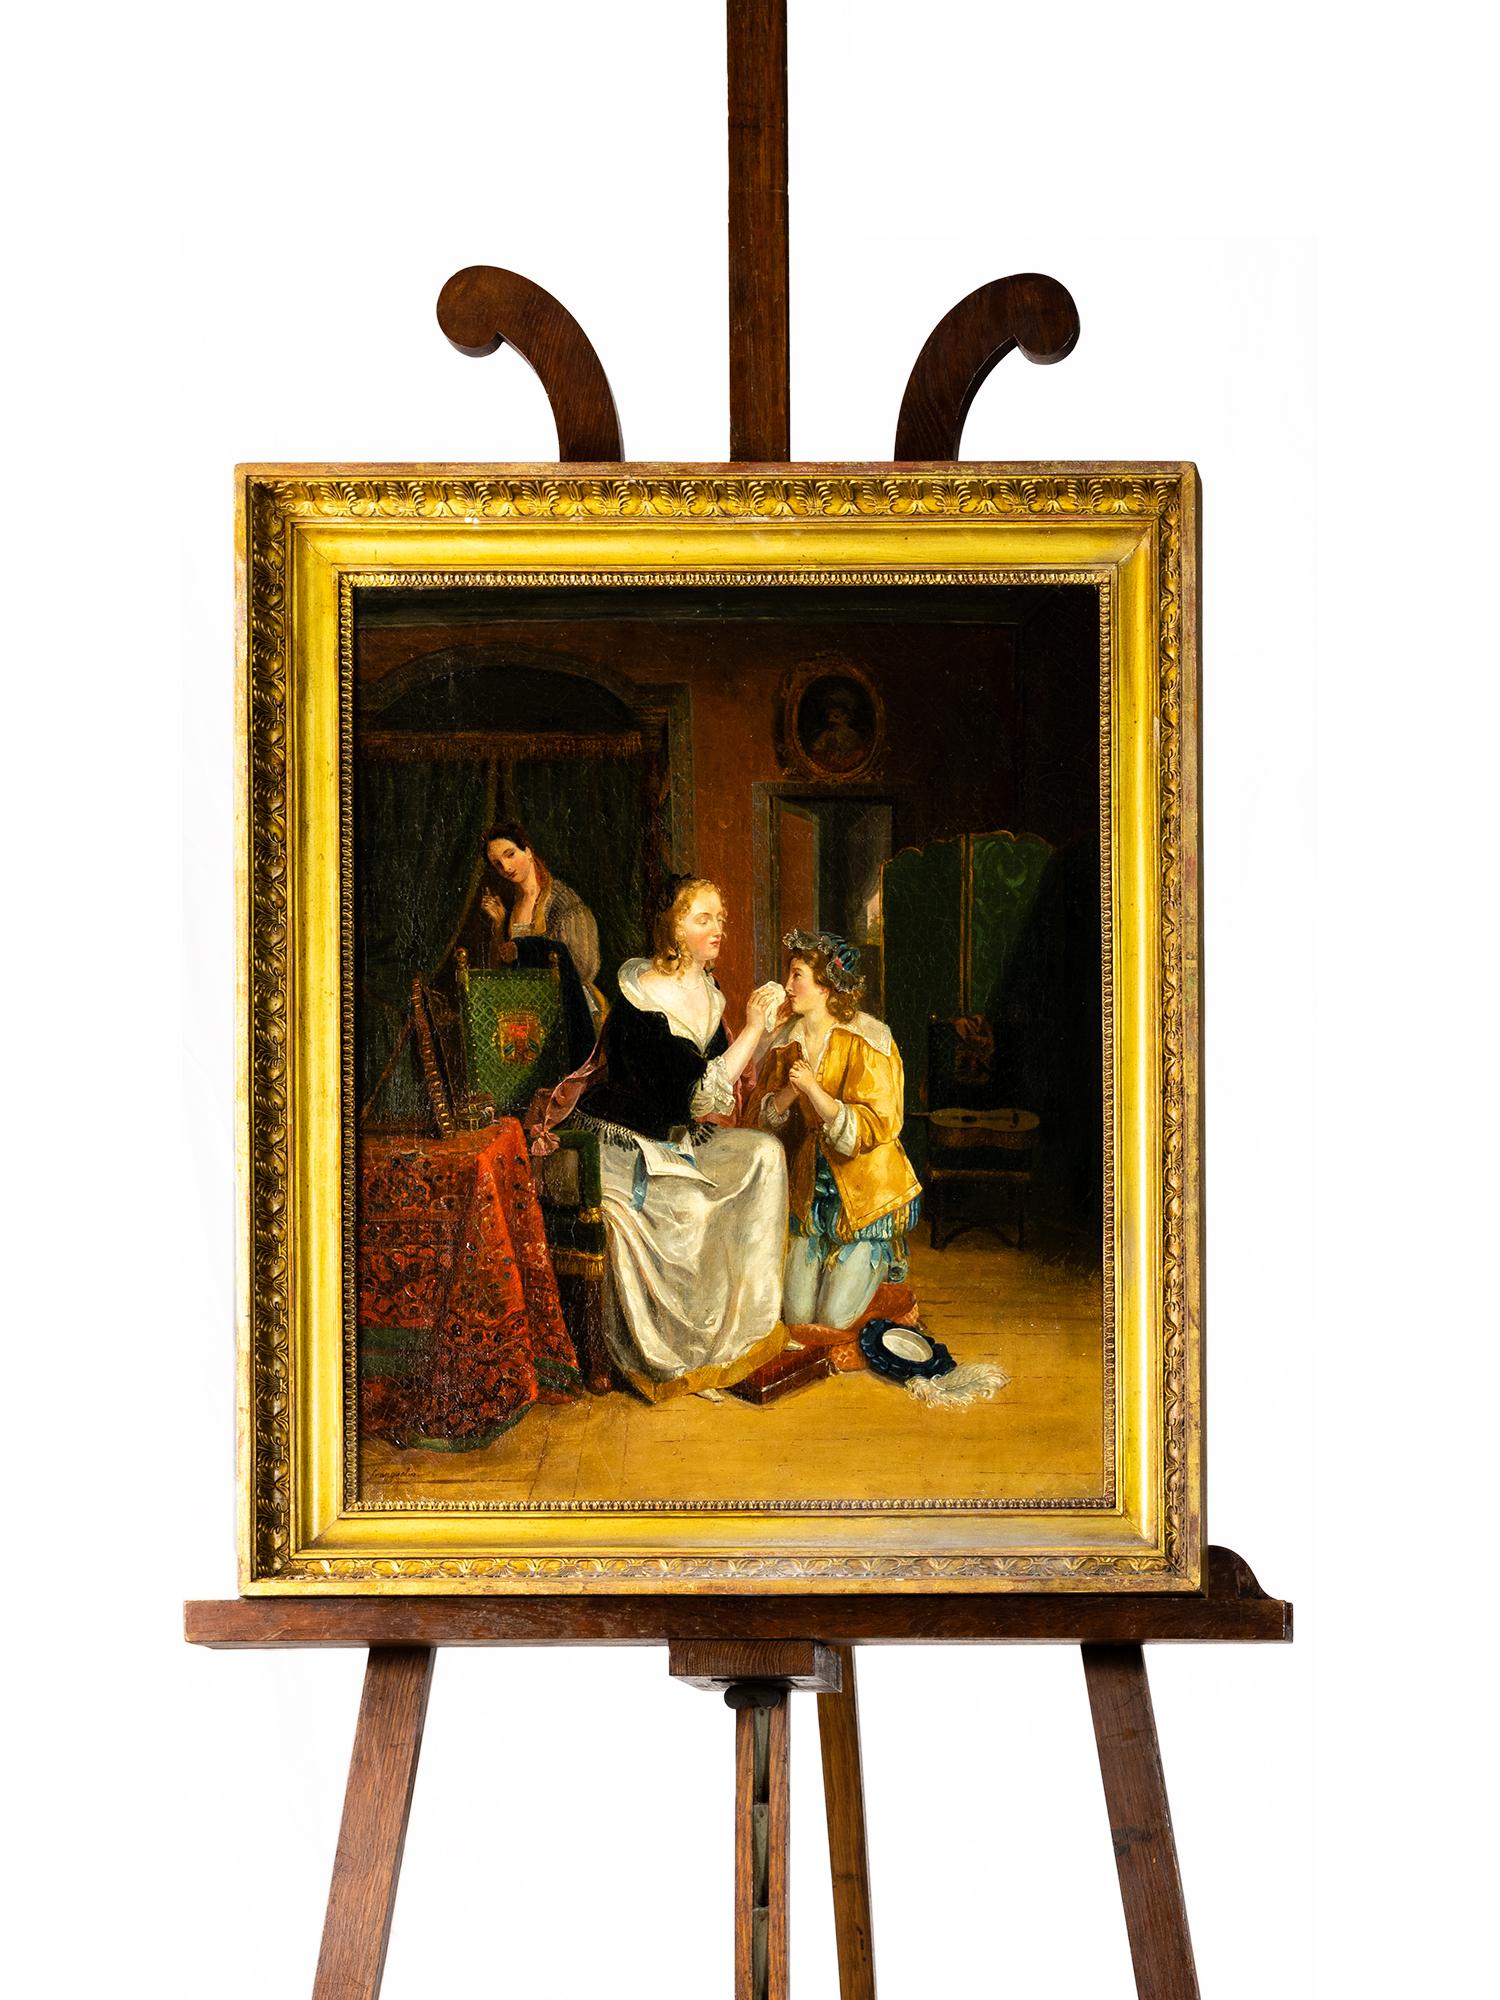 A Romanticism Jean-Augustin Franquelin's painting of a scene of a kneeling daughter crying and a mother wiping tears, signed painting, a prominent painter of the École des Beaux-Arts de Paris. 

Canvas with craquelet, natural from a painting 19th